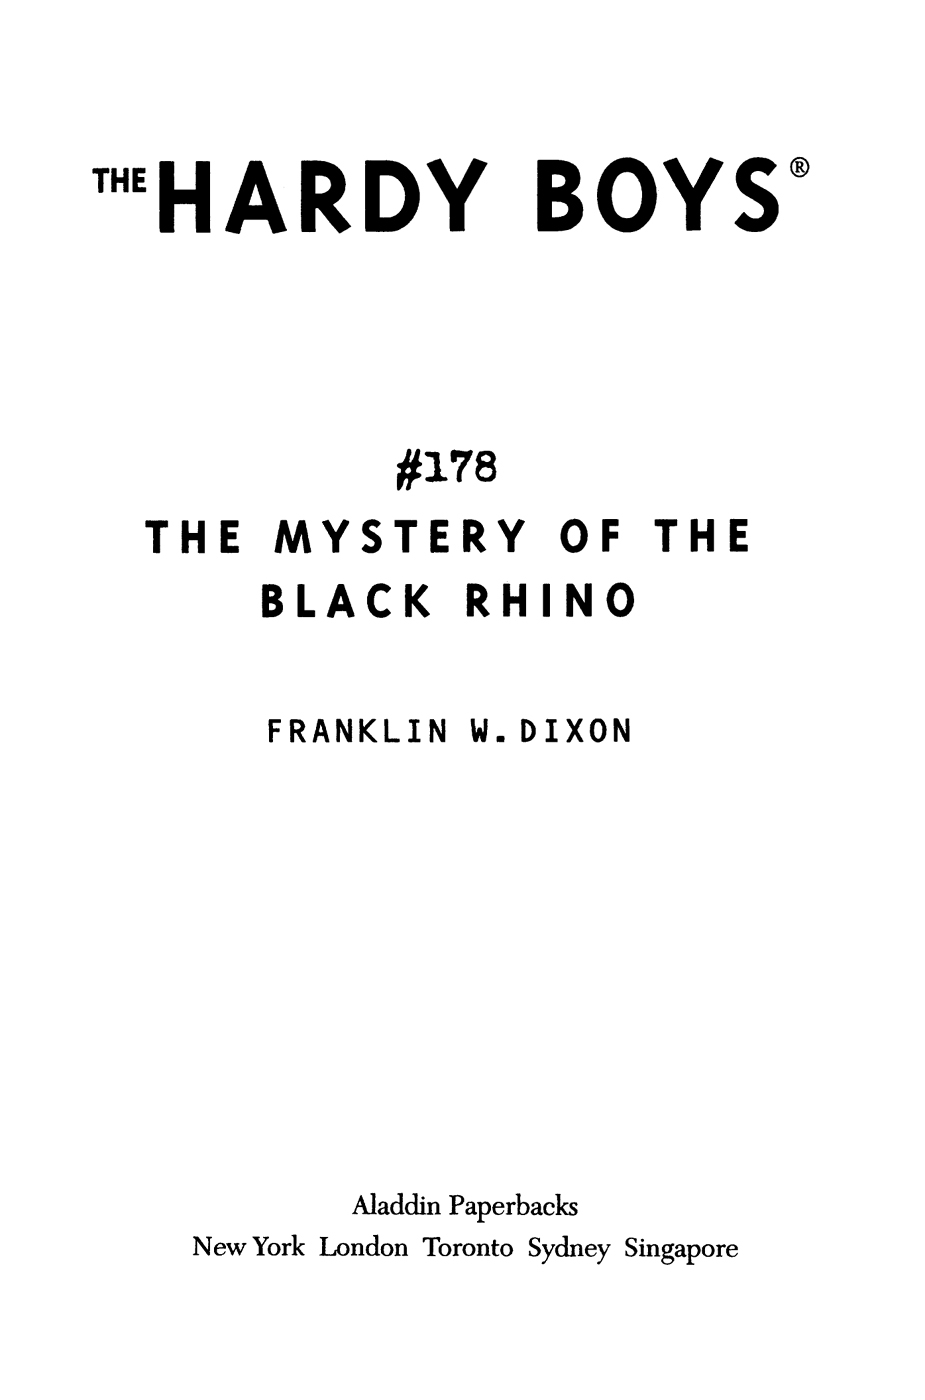 The Mystery of the Black Rhino by Franklin W. Dixon